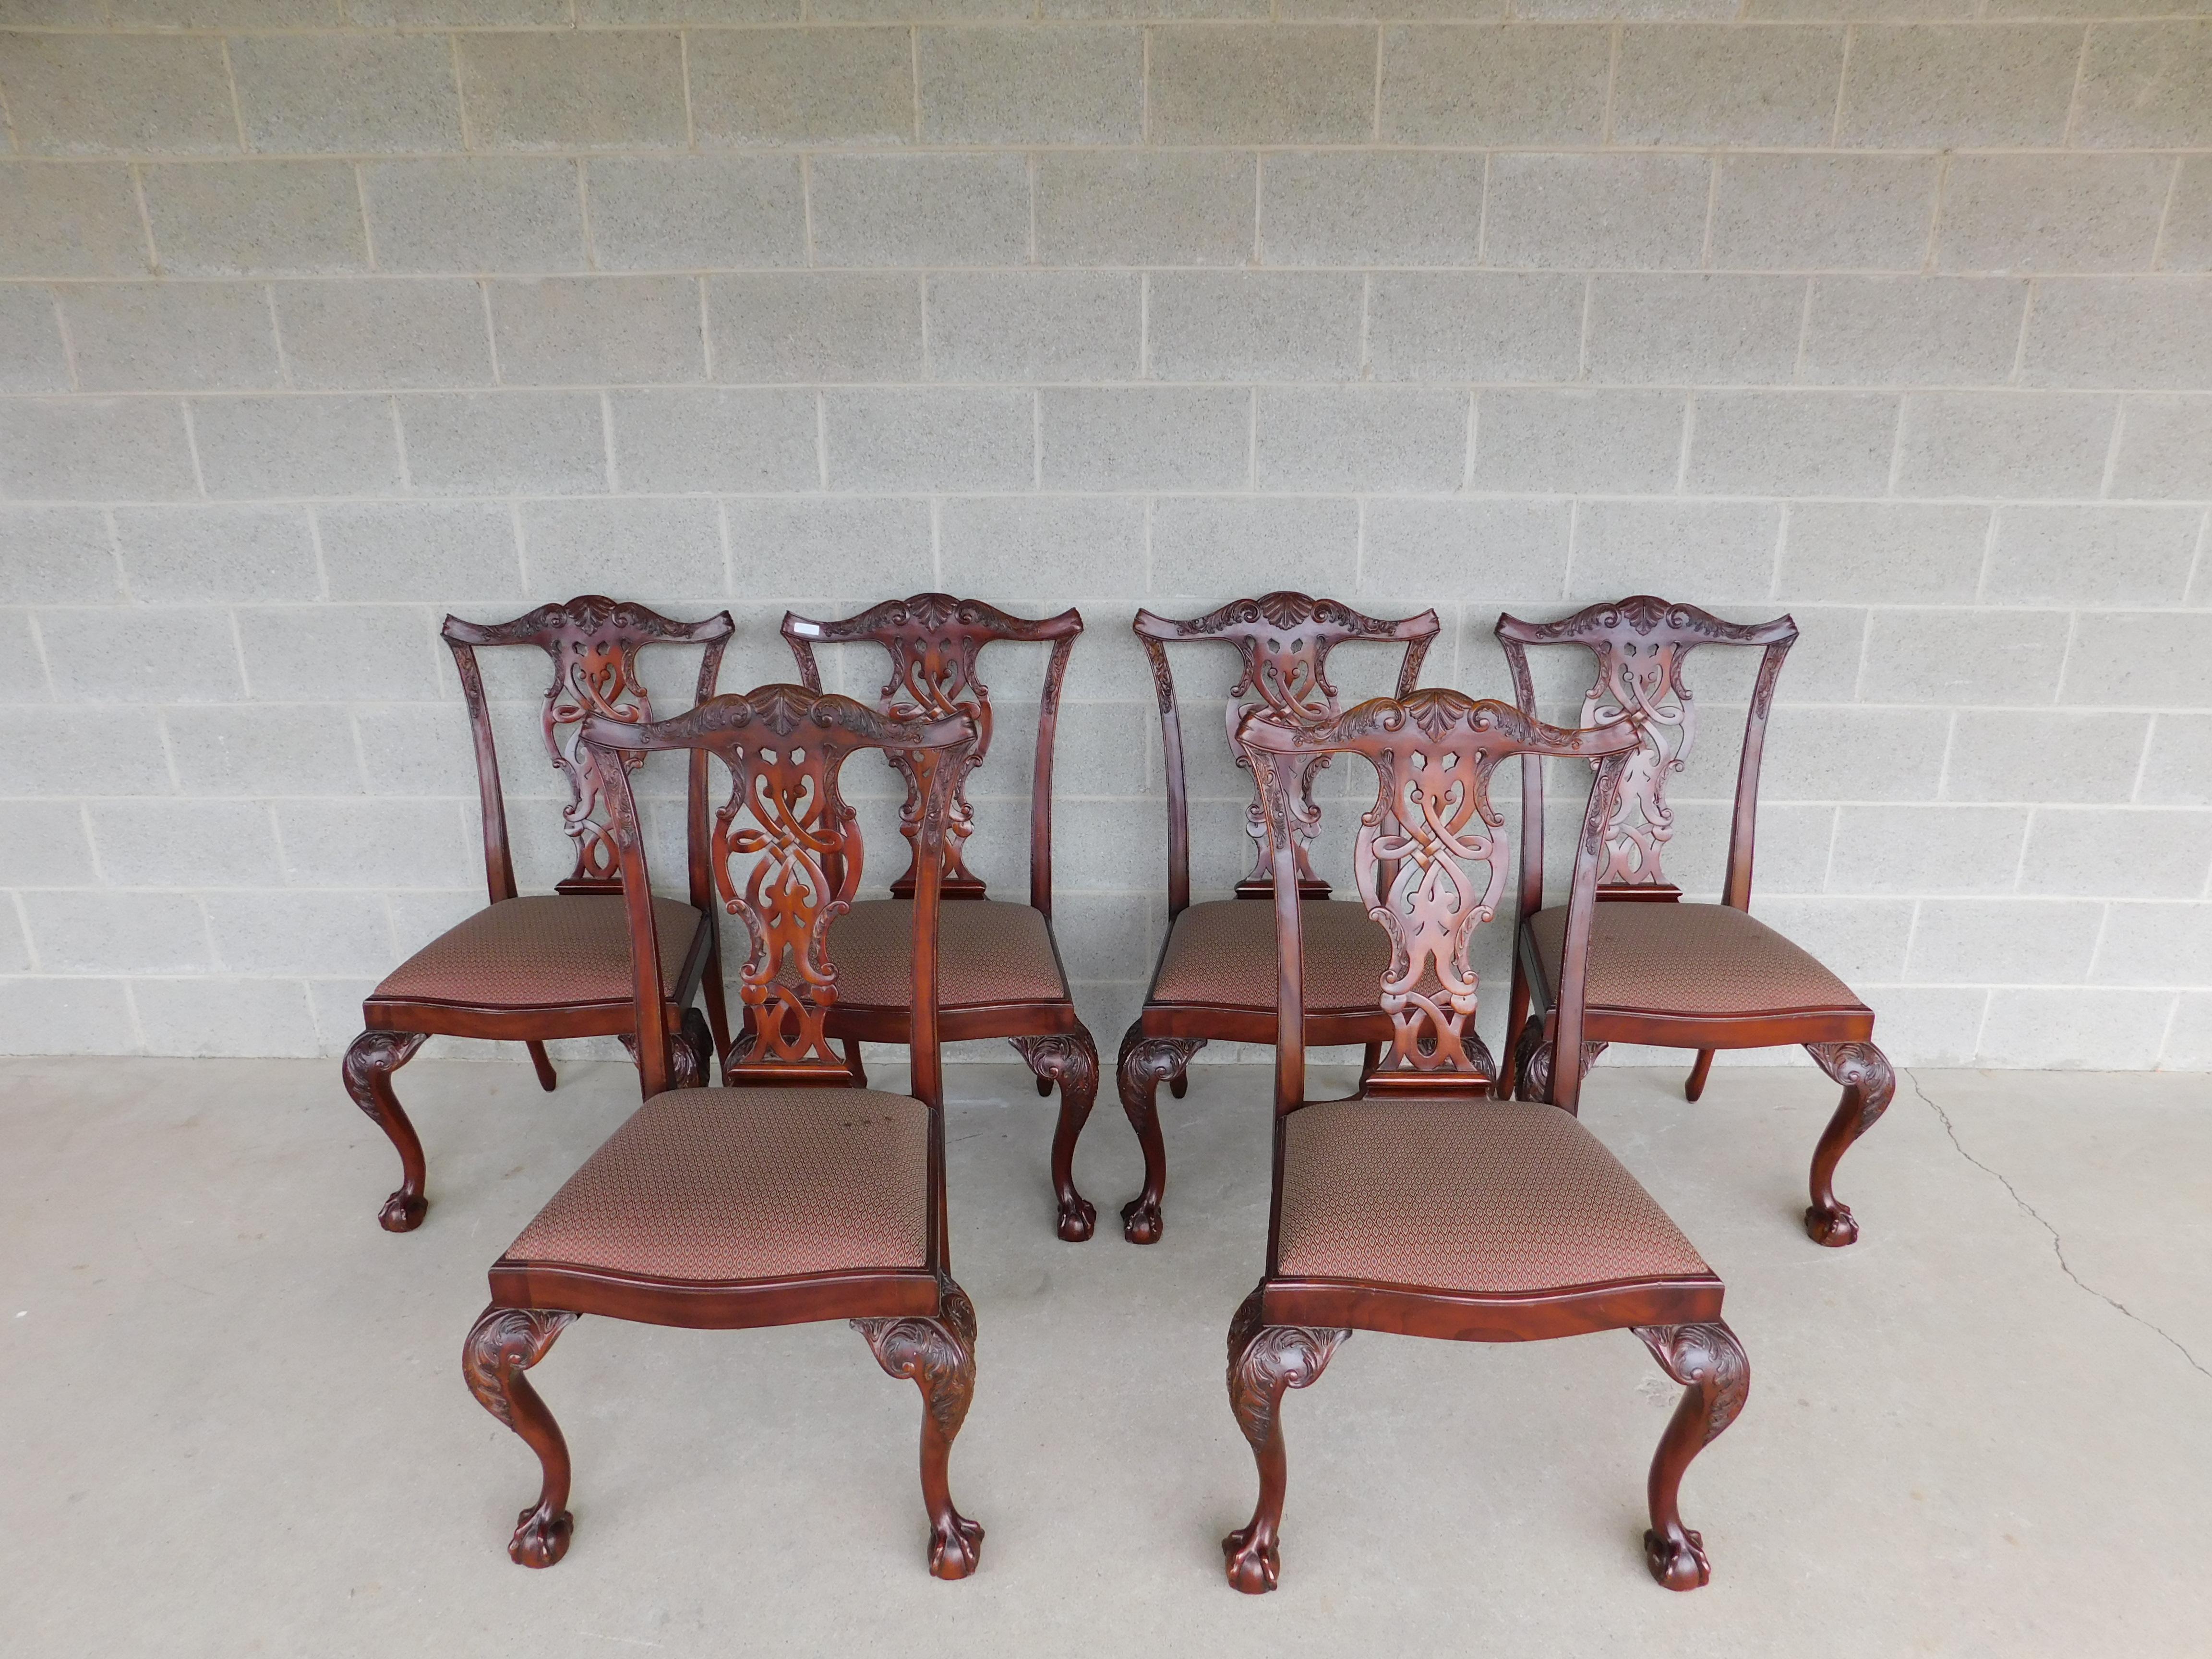 Set of 6 Side Chairs by Maitland Smith, Mahogany Chippendale Style, Ball & Claw Feet, Detailed Carved Knees, Pierced Back. Late 20th Century, Original Upholstery 
Back Height 41